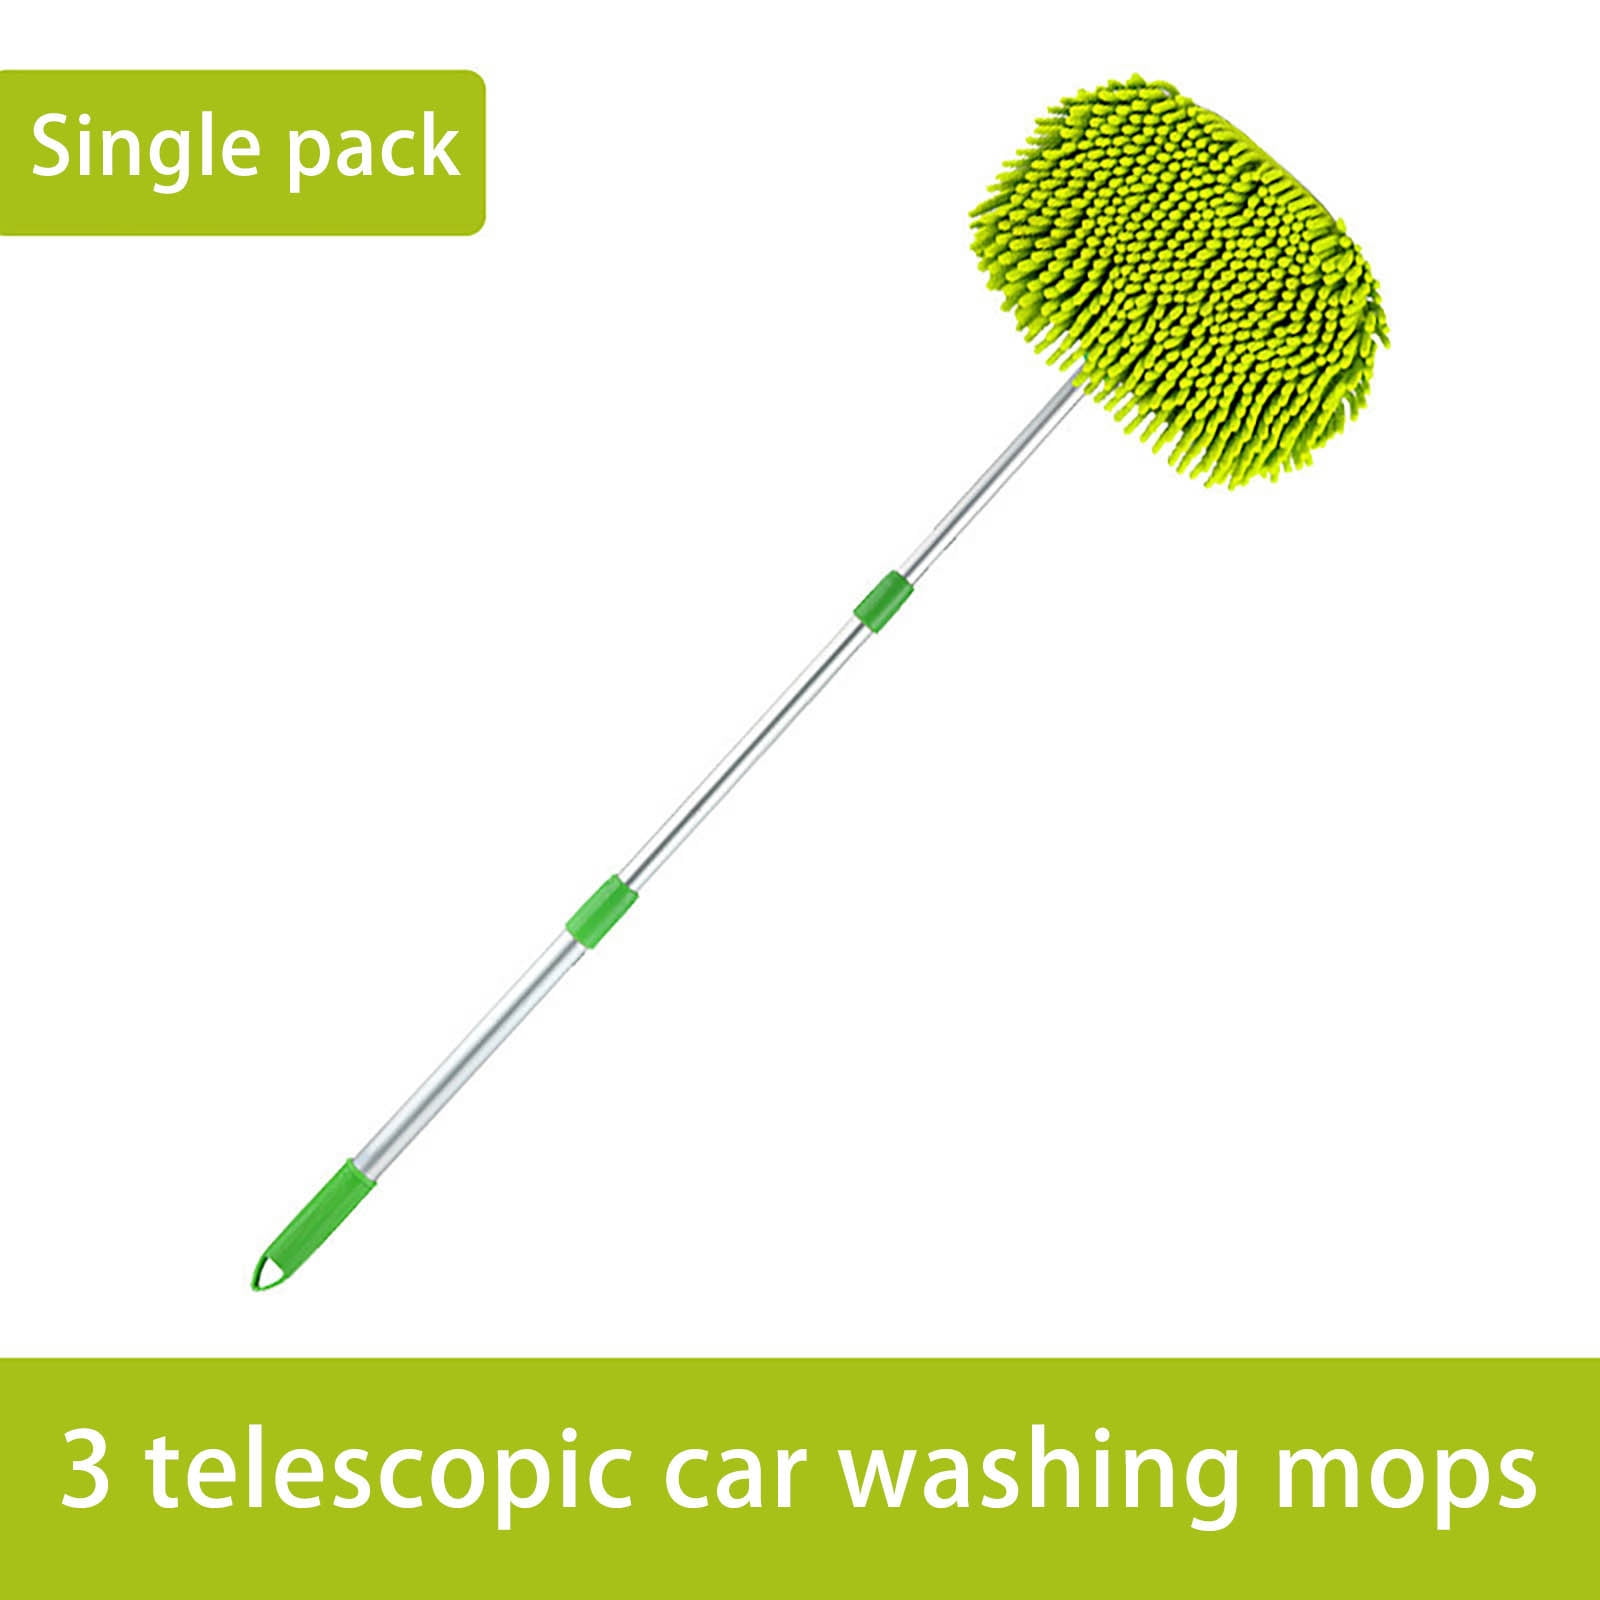 LEZIOA 62 Car Wash Brush with Long Handle Car Cleaning Kit to Clean car  SUV RVs